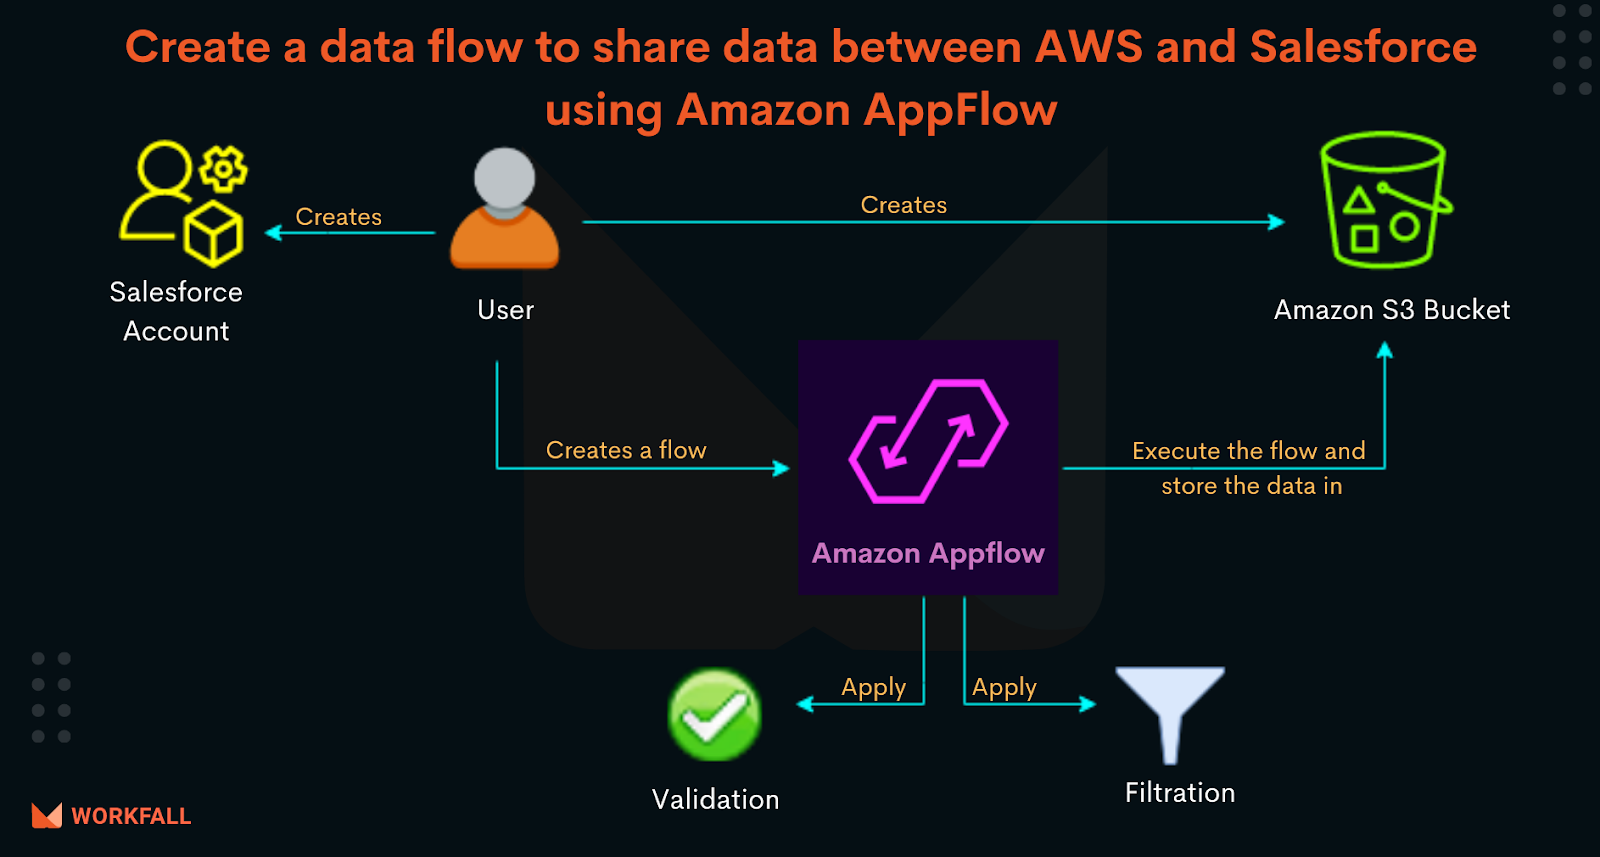 How to create a data flow to share data between AWS and Salesforce using Amazon AppFlow?